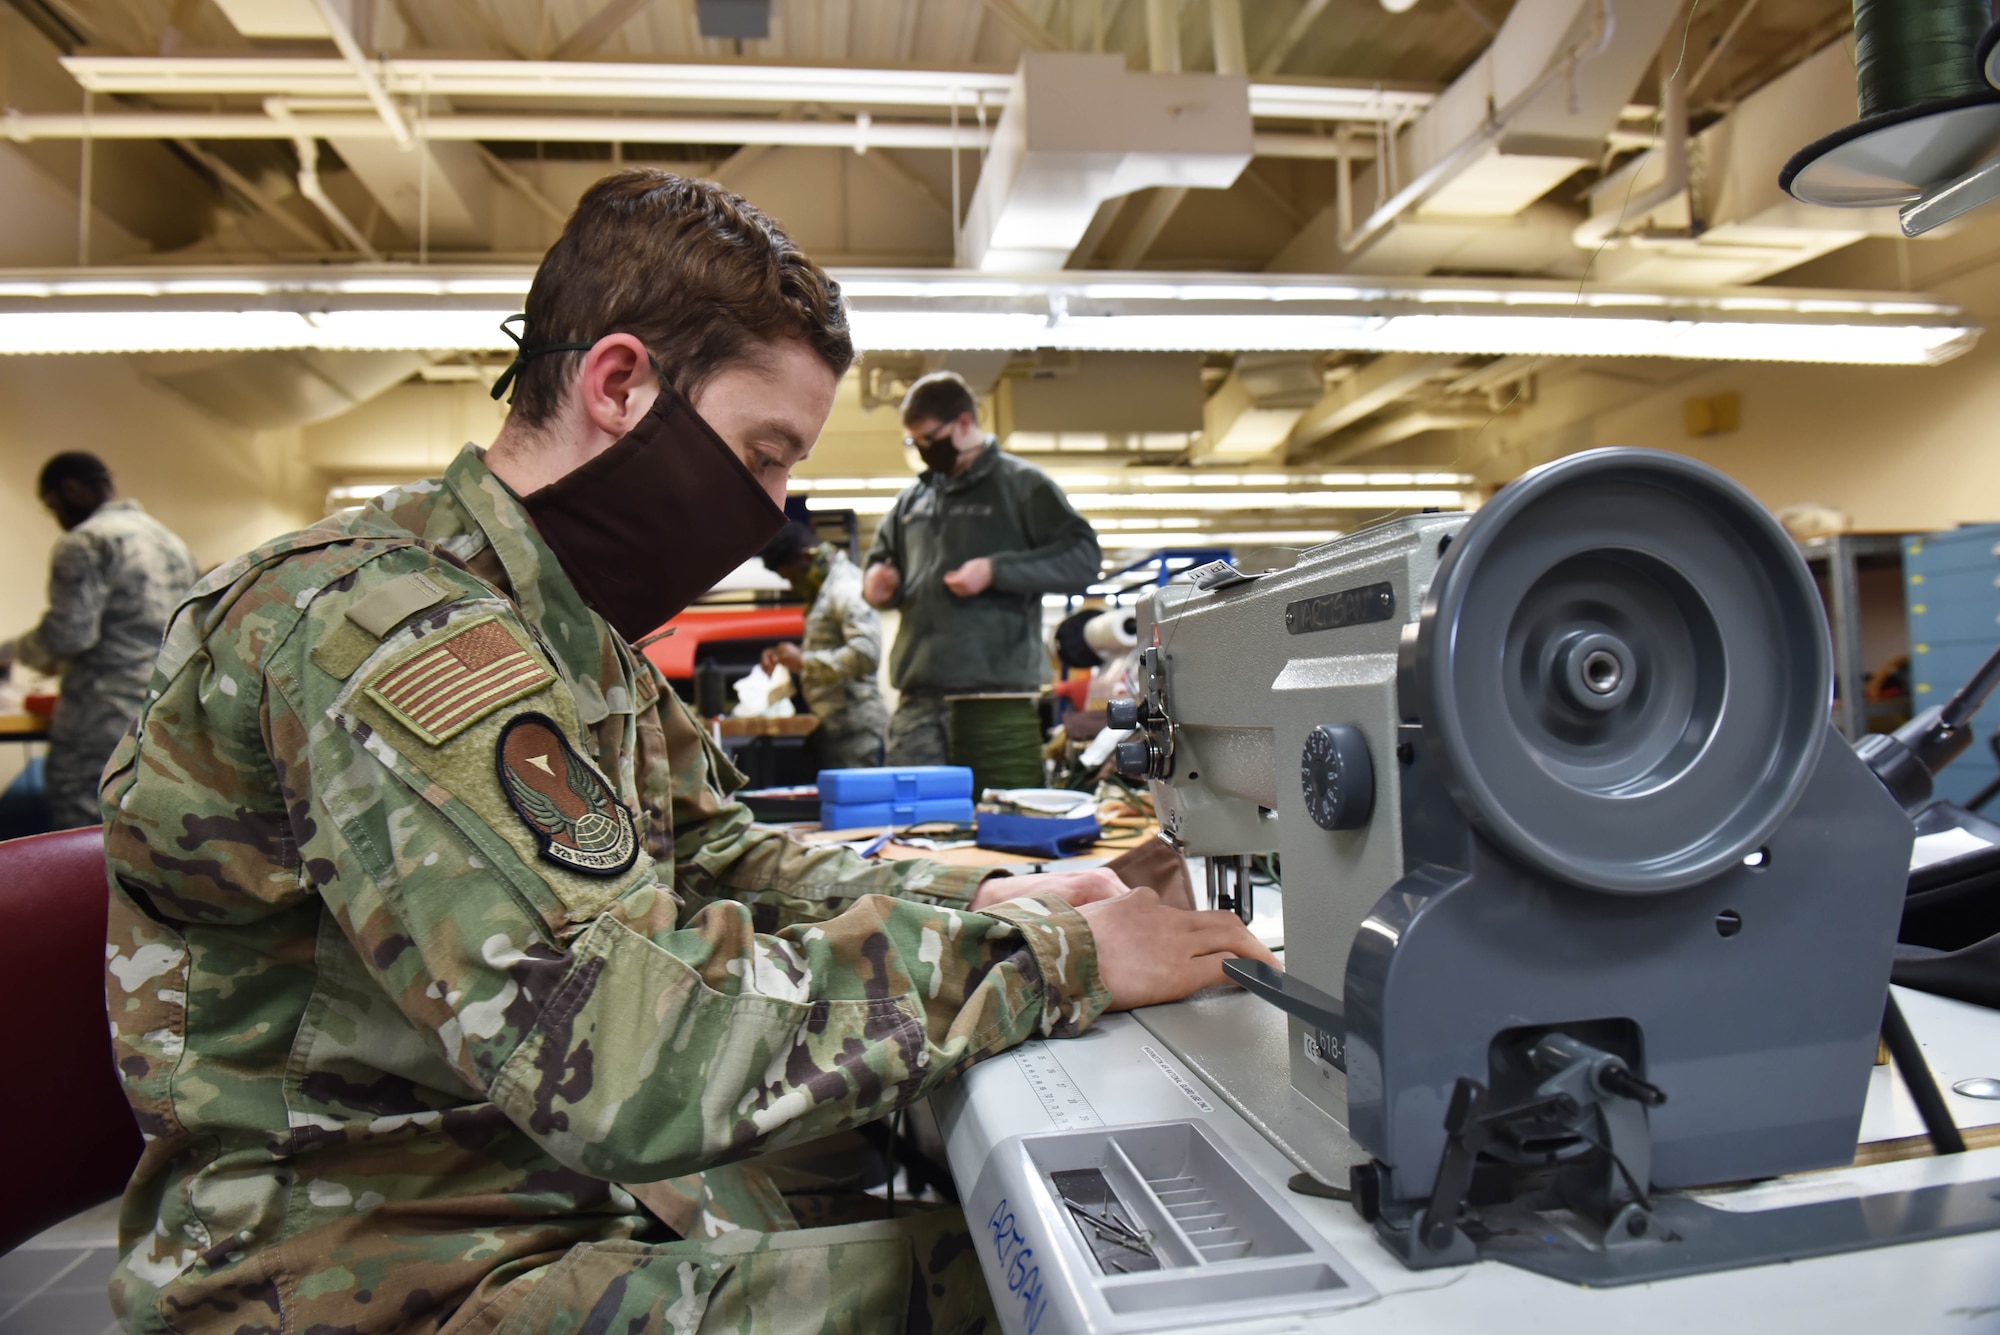 U.S. Air Force Staff Sgt. Cameron Harris, 92nd Operation Support Squadron Aircrew Flight Equipment craftsman, uses a sewing machine to create protective facemasks for Airmen to wear at Fairchild Air Force Base, Washington, April 10, 2020. AFE Airmen’s normal duties include managing the inspection, maintenance and adjustments of every piece of safety and flight equipment for all airframes with a “zero mistake” standard, in order to prevent equipment failures and accidents from happening. (U.S. Air Force photo by Senior Airman Lawrence Sena)